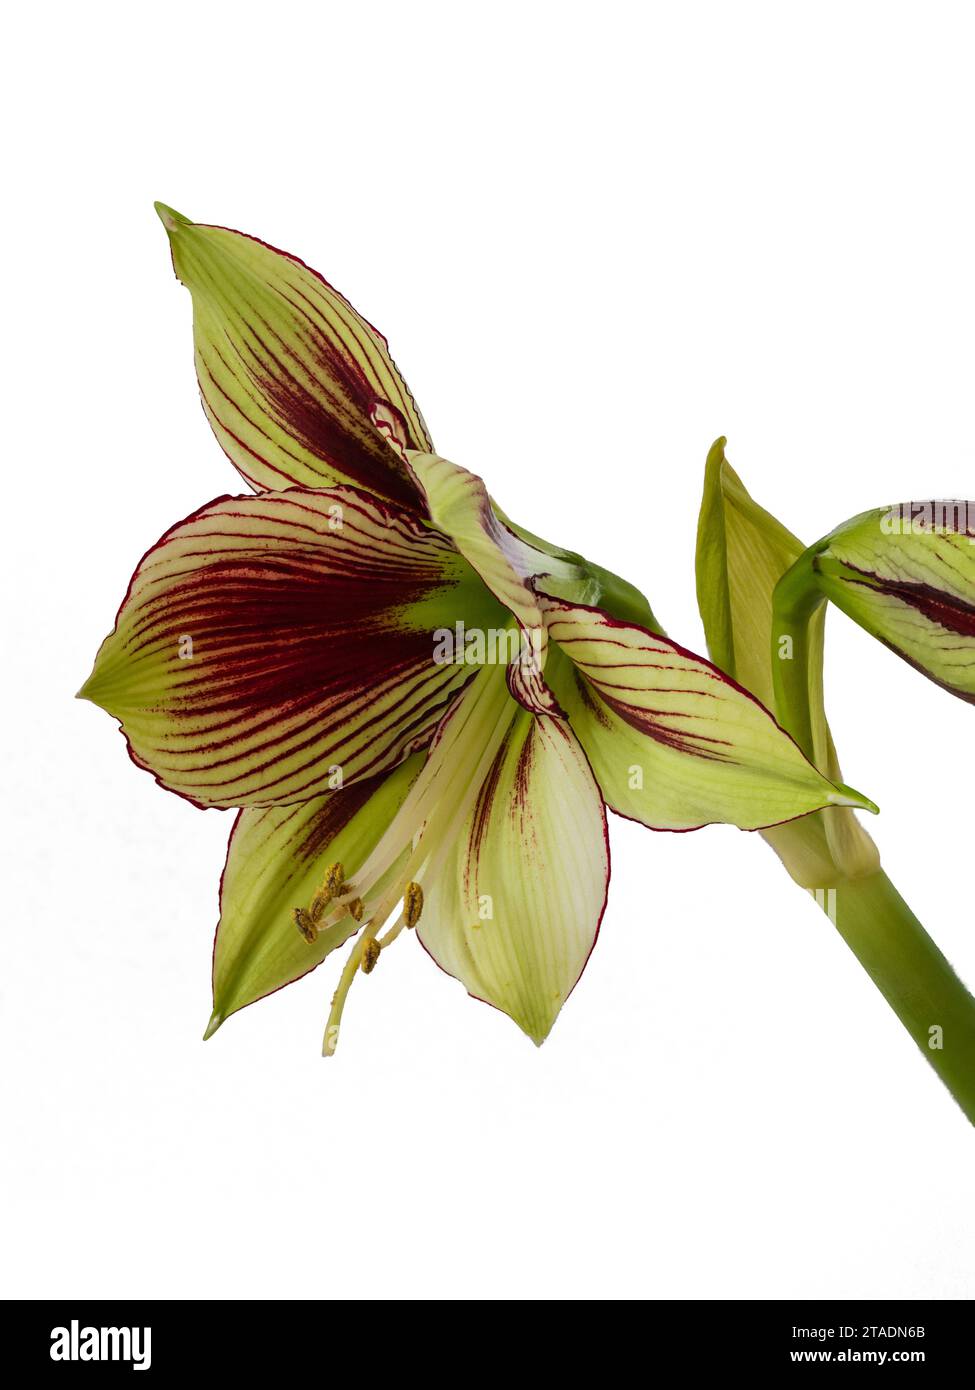 Exotic red streaked greenish white flowers of the tender butterfly amaryllis, Hippeastrum papilio, on a white background Stock Photo